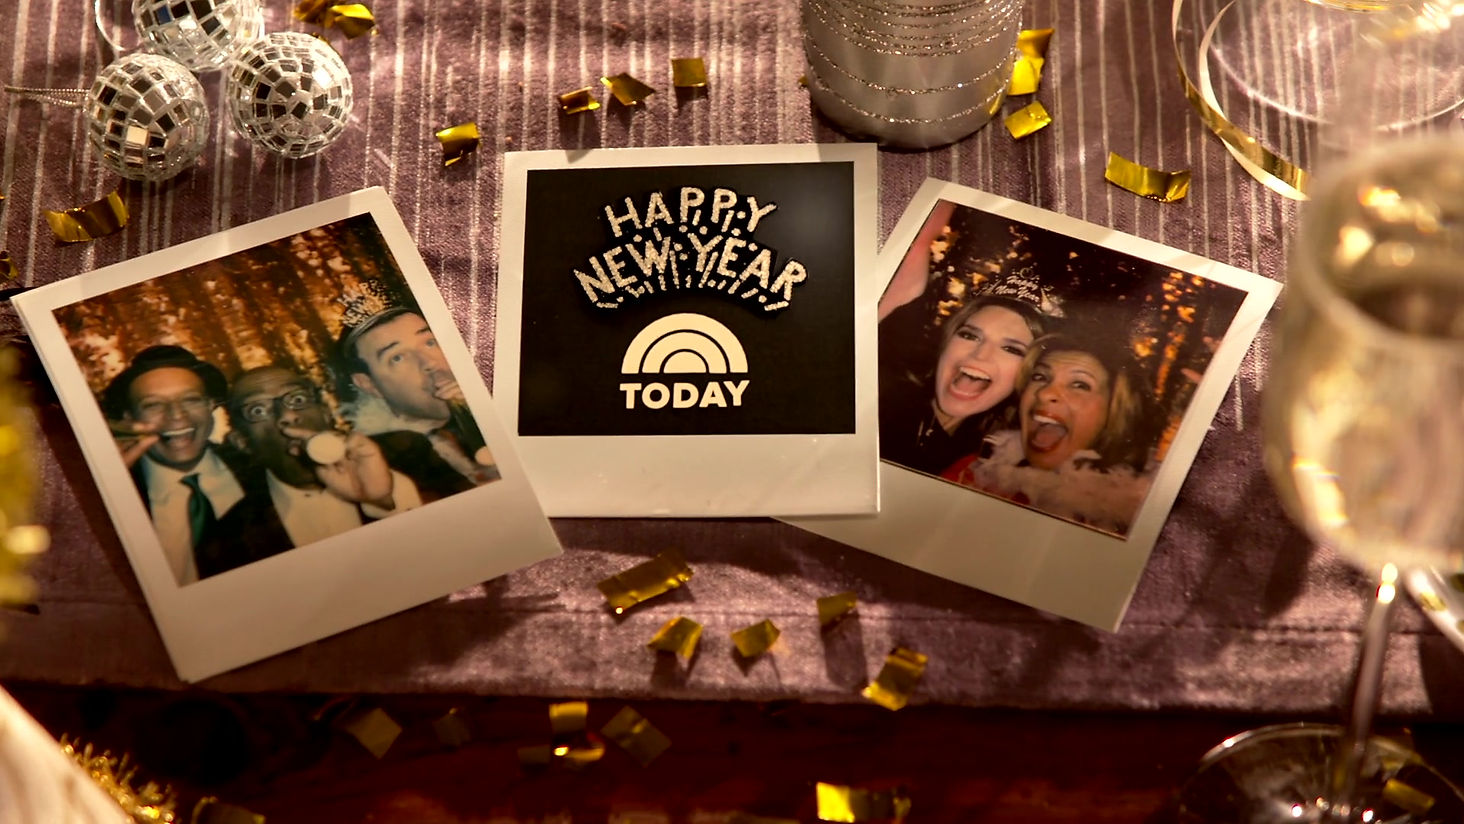 NBC & Zoomari Films: "Today Show New Year’s" (Promo :05)